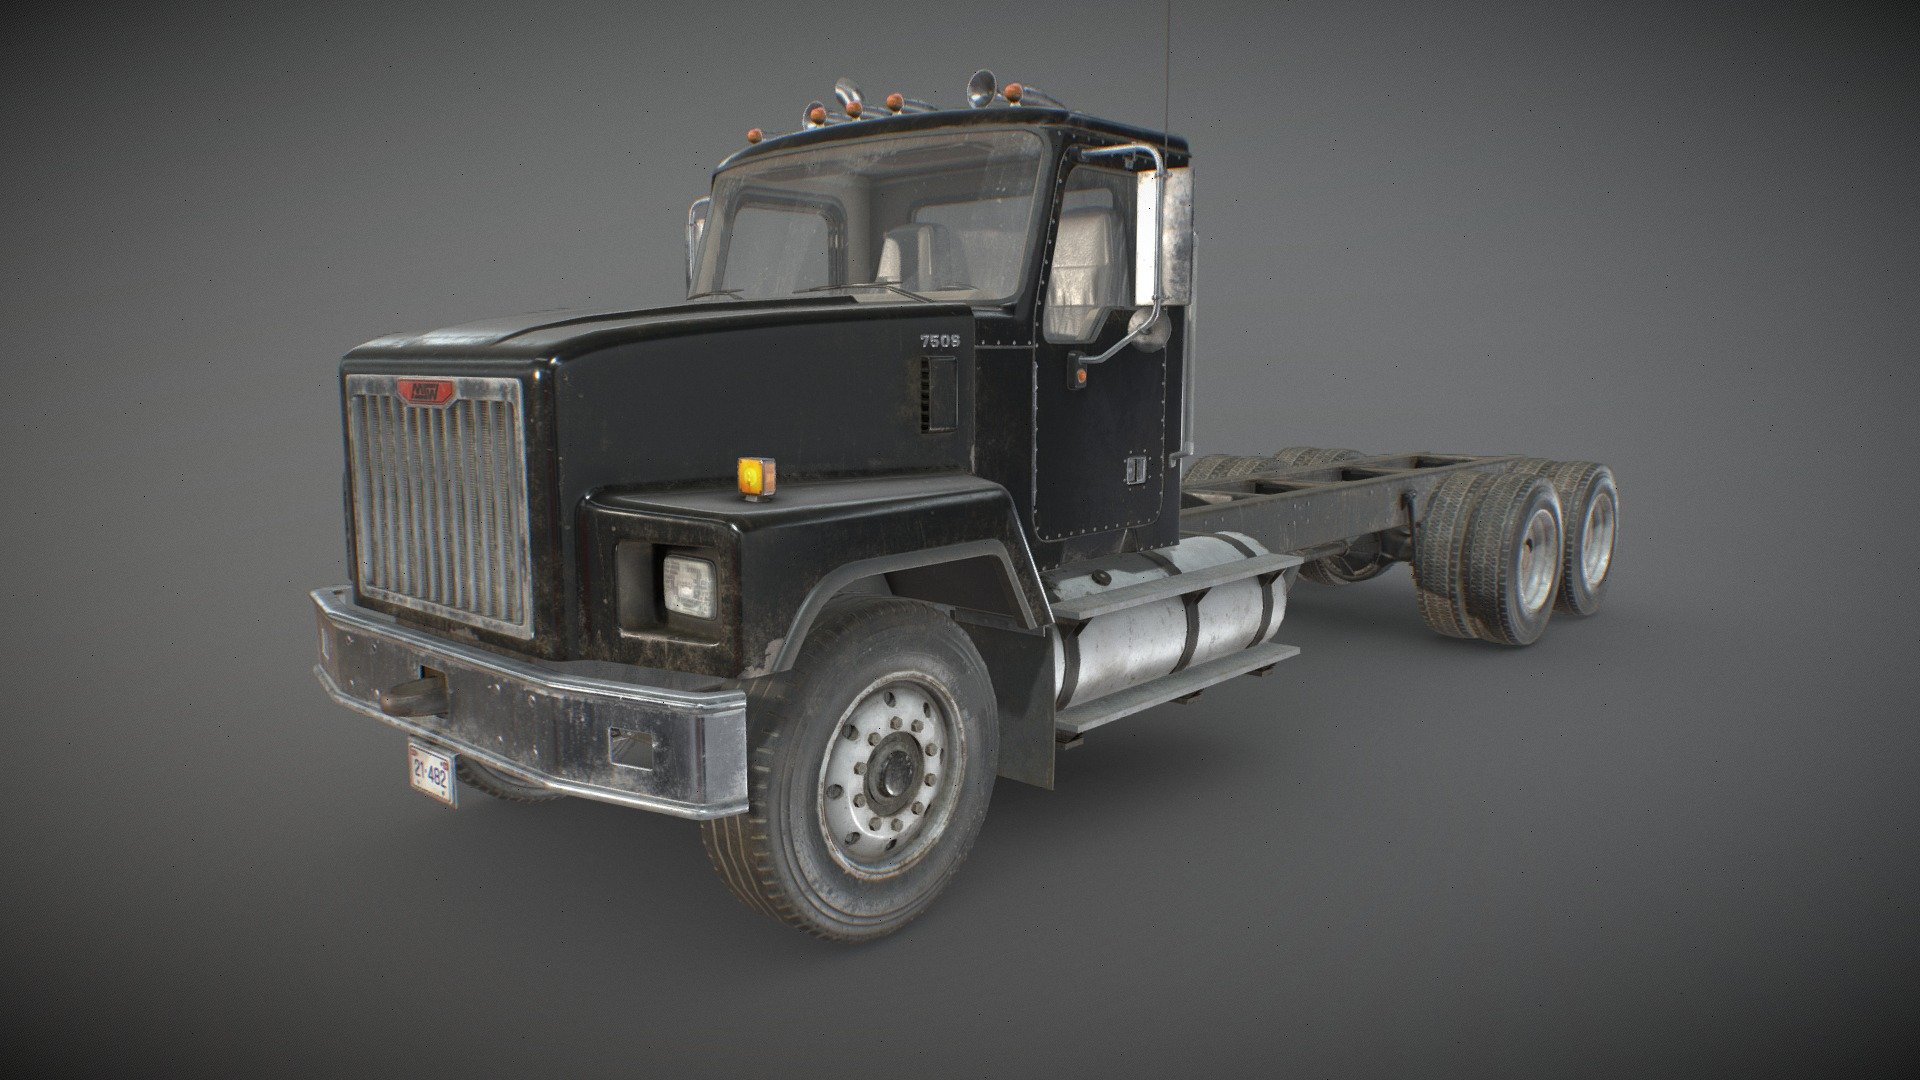 3D Model of generic Classic Truck, game-ready and low-poly:


Real-world scale and centered.
The unit of measurement used for the model is centimeters
Cabin interior fully modeled and textured.
Doors, wheels and steering wheel are separated and can be easily rigged/animated.
Interior is a separate object to detach if needed.
PBR textures made in Substance Painter
All branding and labels are custom made.
Second uv channel included for lightmaps.
Average texel density: 800-900 px/m

Total Polys:  16.106 (31.129 tris)

Maps sizes: 


Body: 4096x4096
Chassis: 4096x4096
Interior: 4096x4096
Wheels: 2048x2048
Glass: 2048x2048

Provided Maps:


Albedo 
Normal
Roughness
Metalness
AO
Opacity included in Albedo (glass)
Emissive

Formats Incuded - MAX / BLEND / OBJ / FBX 

Packed ORM textures available uppon request

This model can be used for any game, film, personal project, etc. You may not resell or redistribute any content - Classic Truck - Black - Low Poly - Buy Royalty Free 3D model by MSWoodvine 3d model